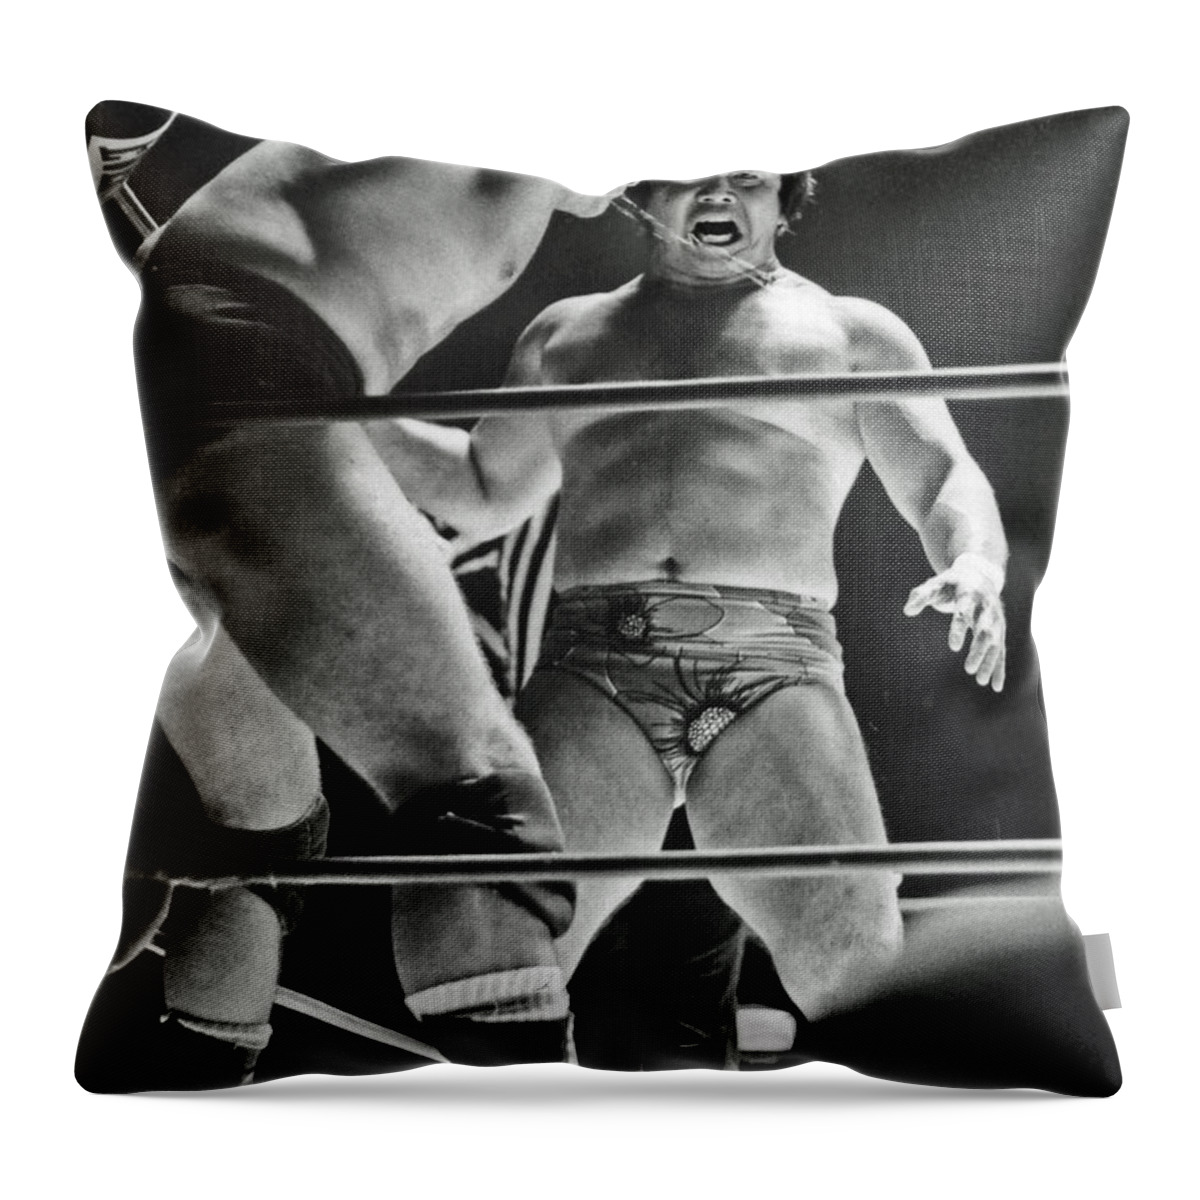 Old School Wrestling Throw Pillow featuring the photograph Old School Wrestling Karate Chop on Don Muraco by Dean Ho by Jim Fitzpatrick